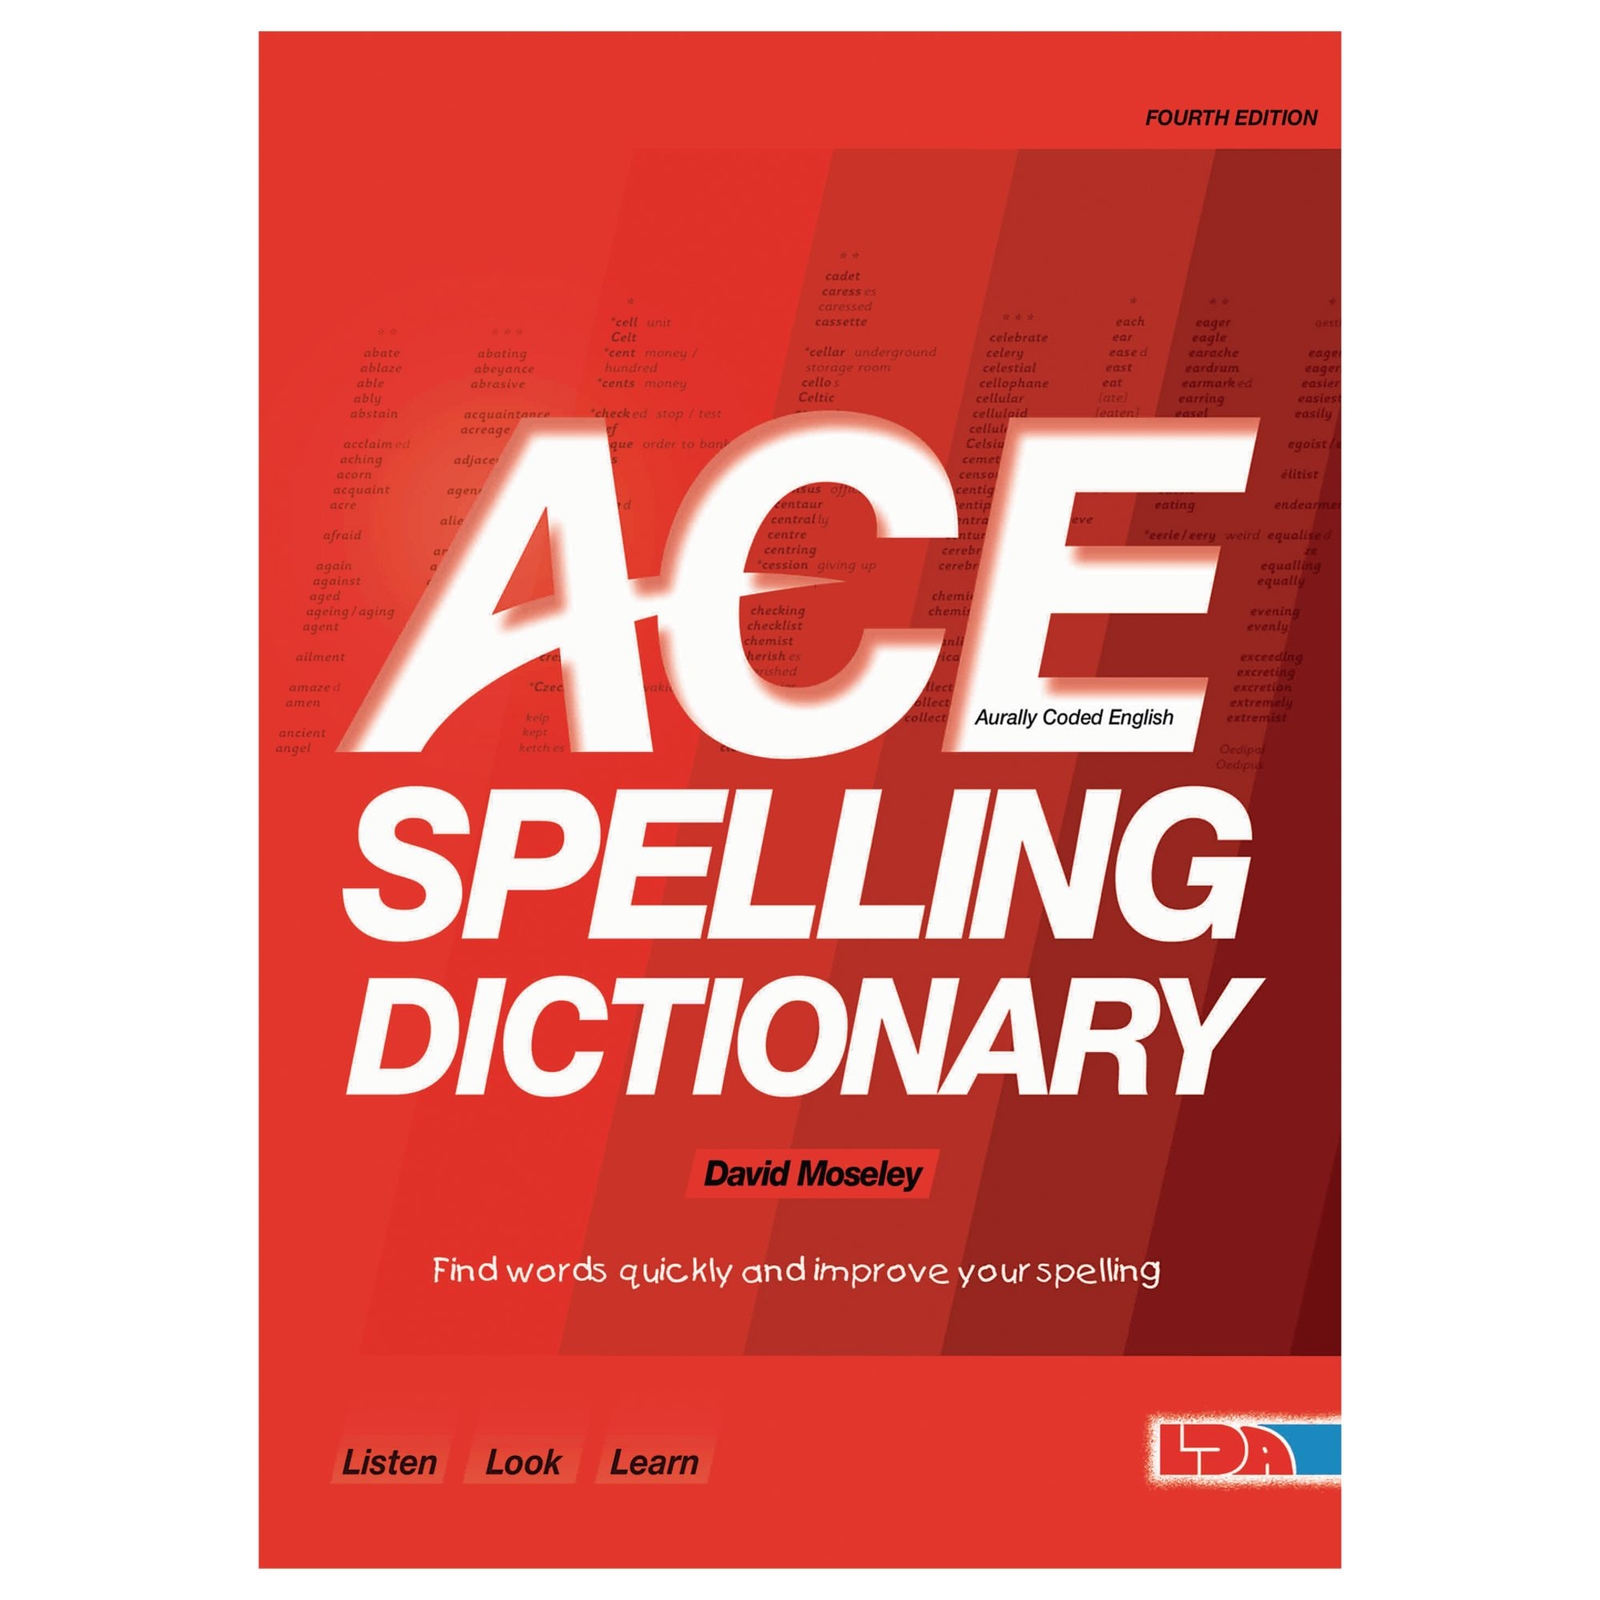 ACE Spelling Dictionary